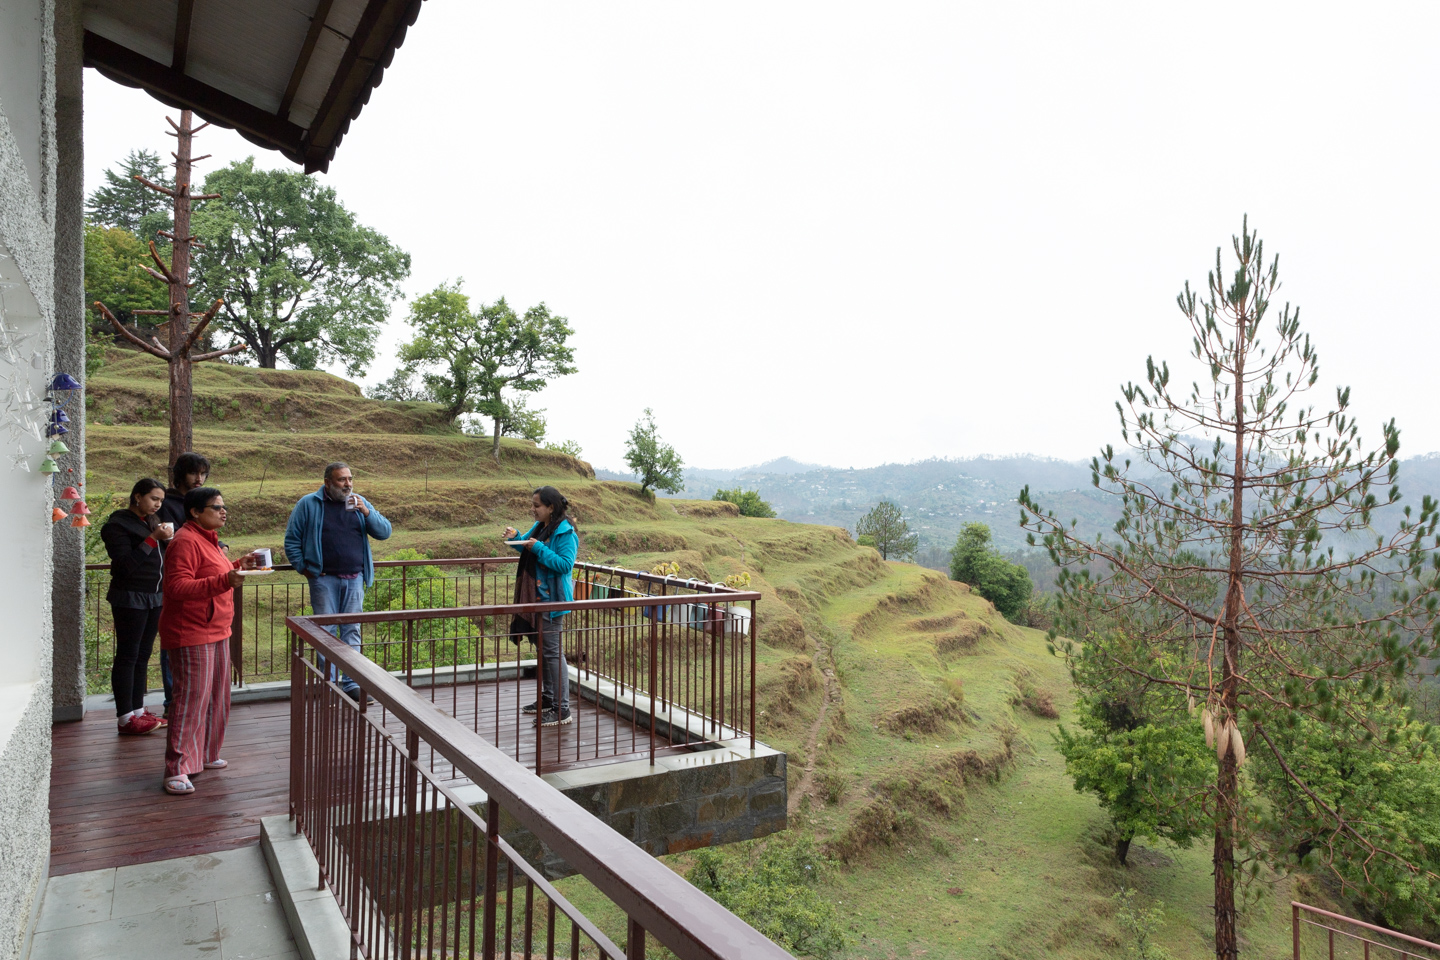 The wooden deck overlooking the valley